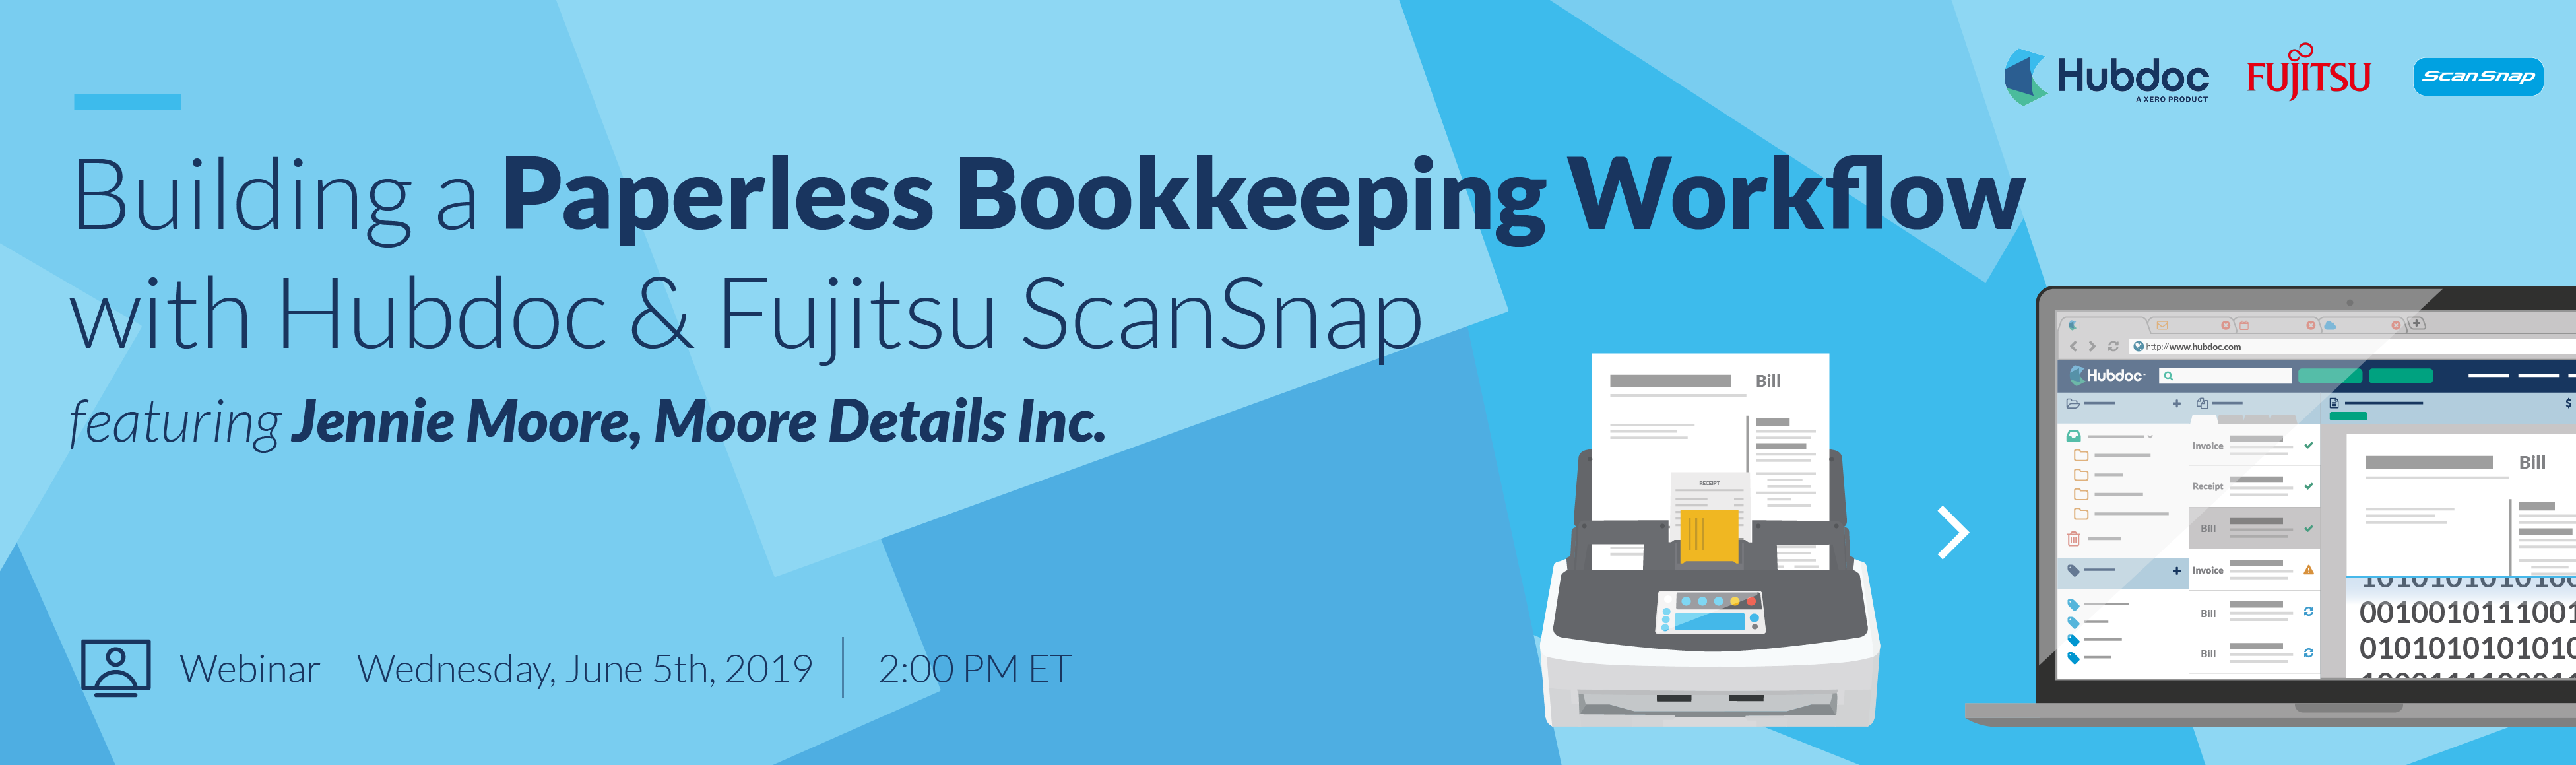 Building a Paperless Workflow with Hubdoc & Fujitsu ScanSnap